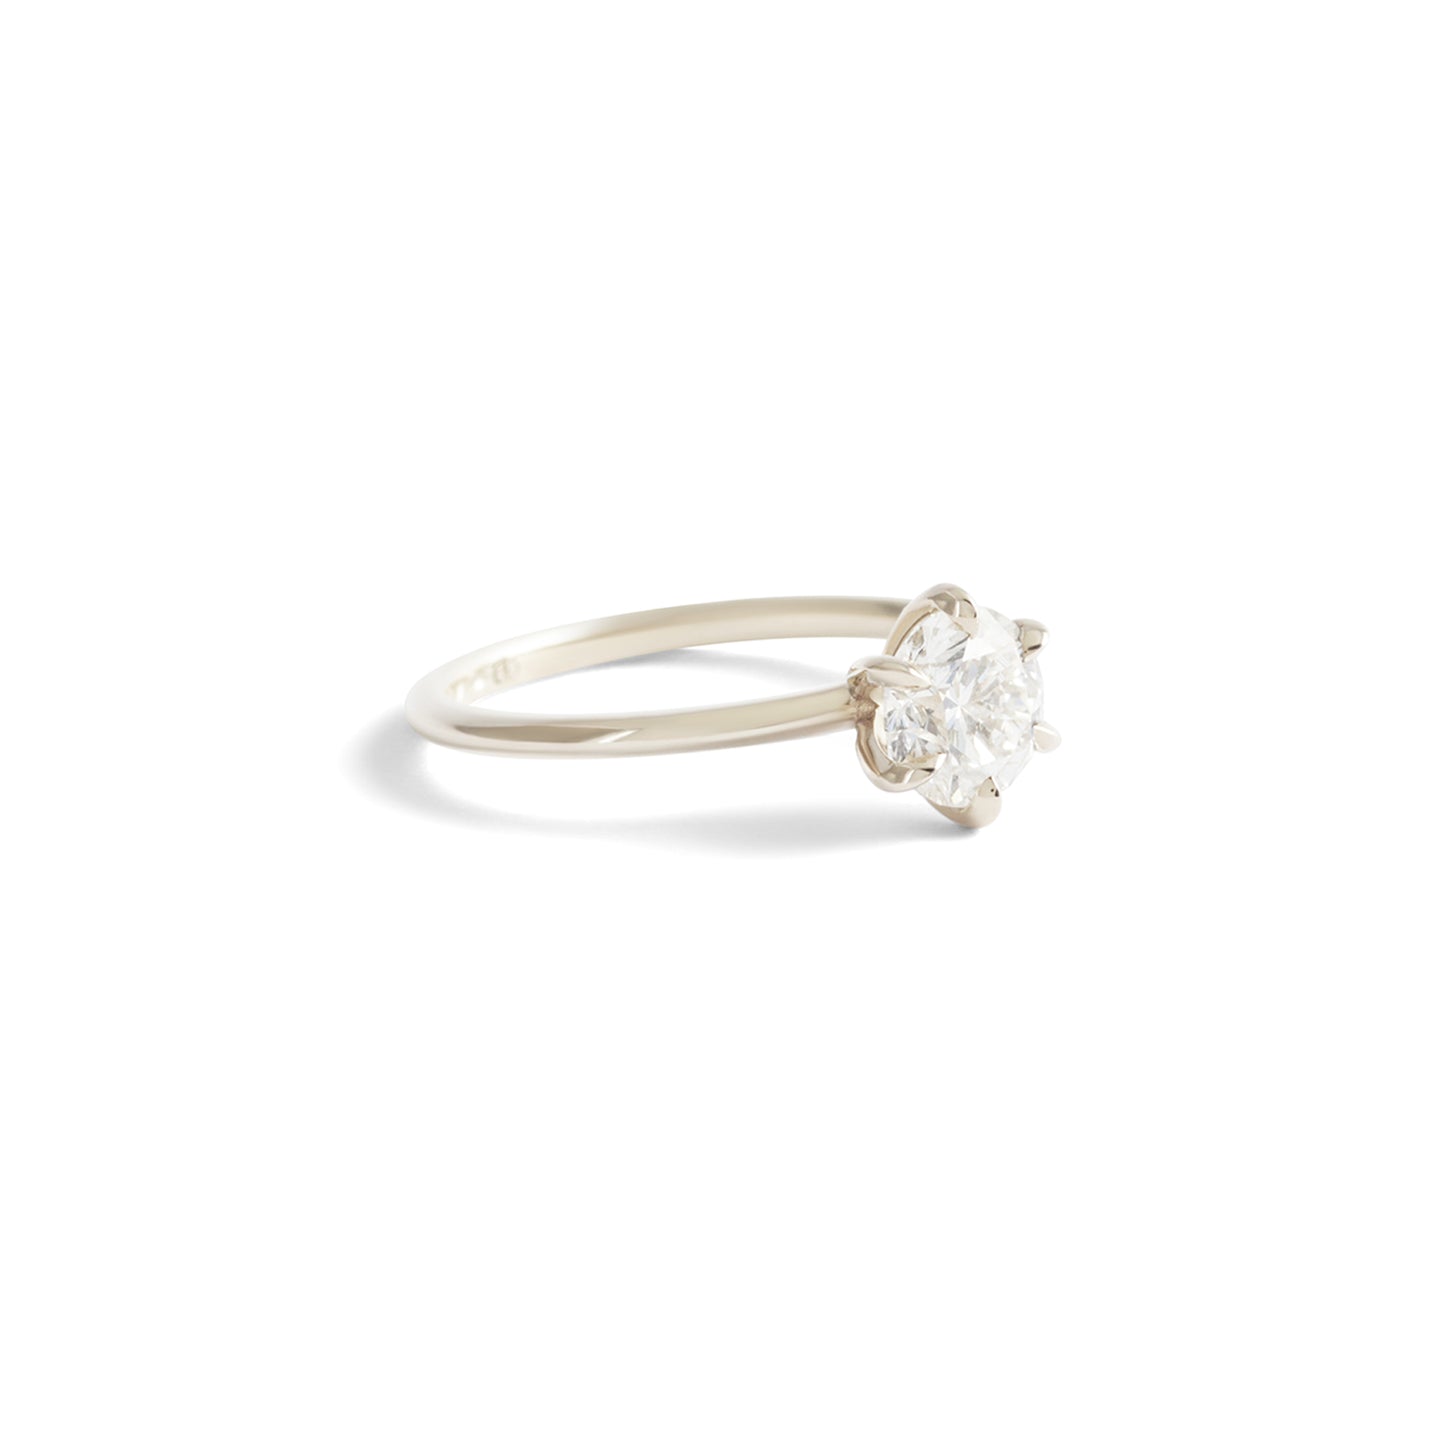 6 Prong Solitaire Ring / Lab Round White Diamond 1.01ct - Goldpoint Studio - Greenpoint, Brooklyn - Fine Jewelry